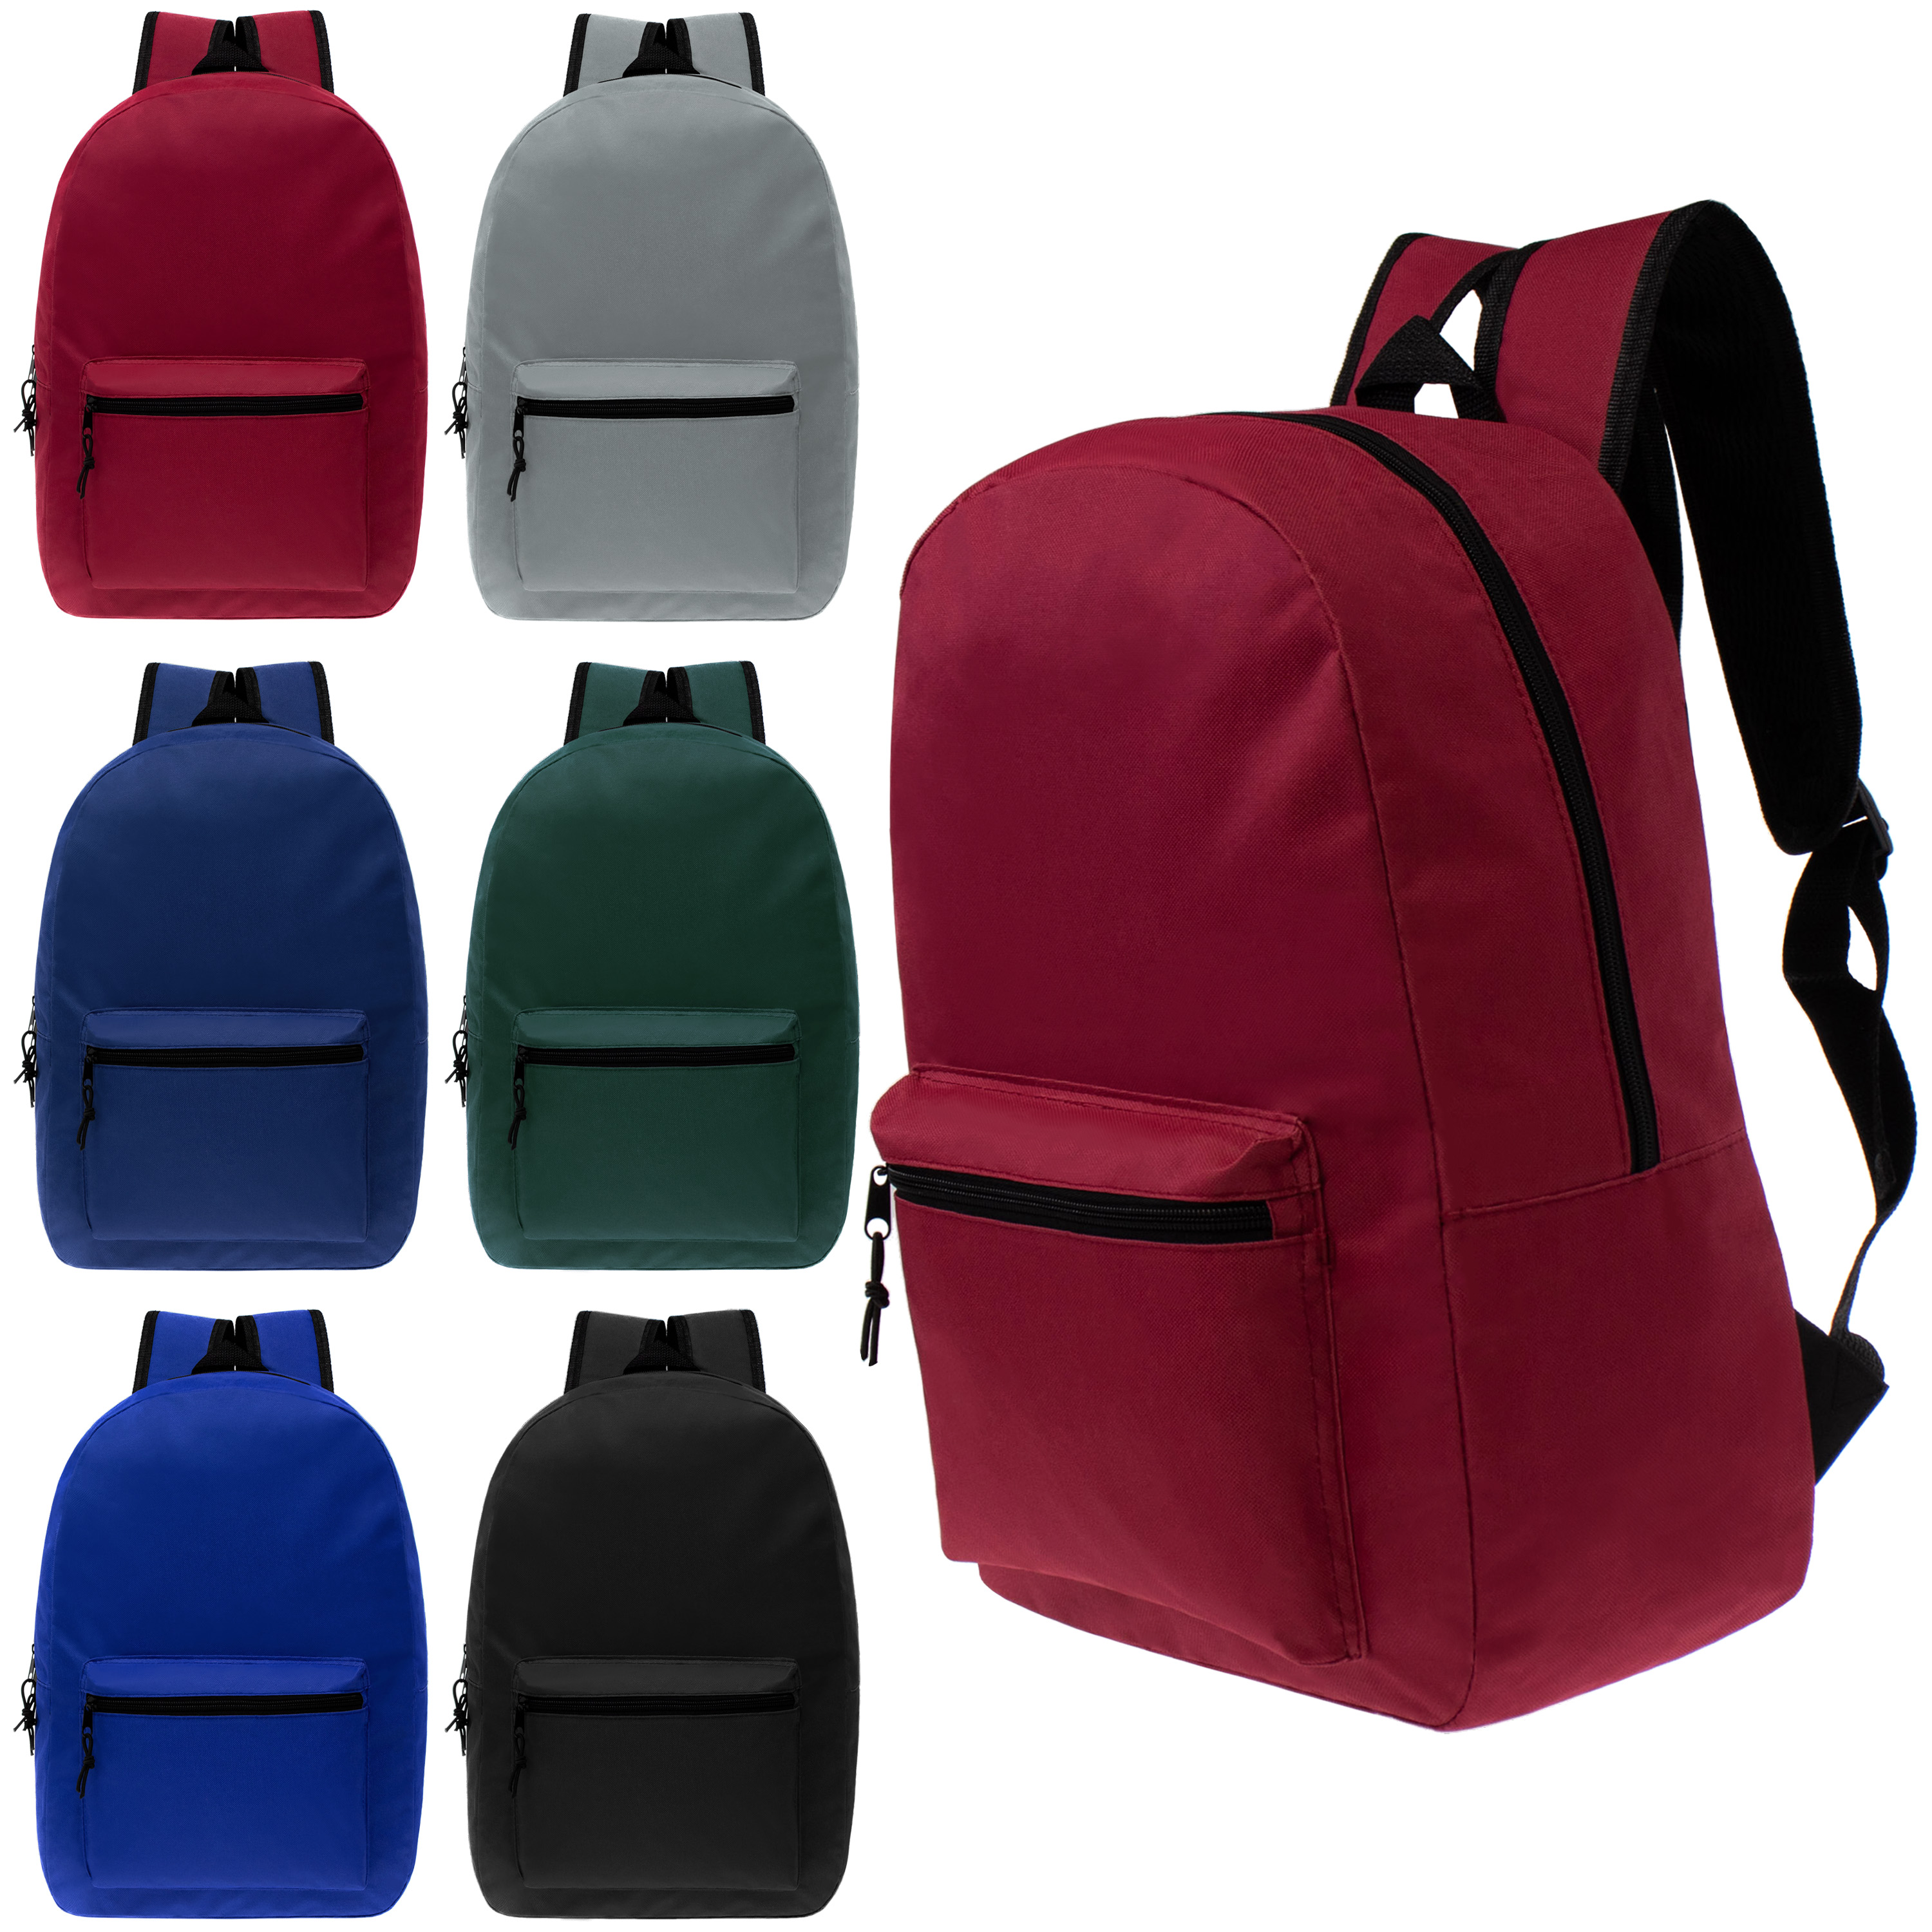 ''15'''' Lightweight Classic Style BACKPACKs w/ Adjustable Padded Straps - Assorted Colors''